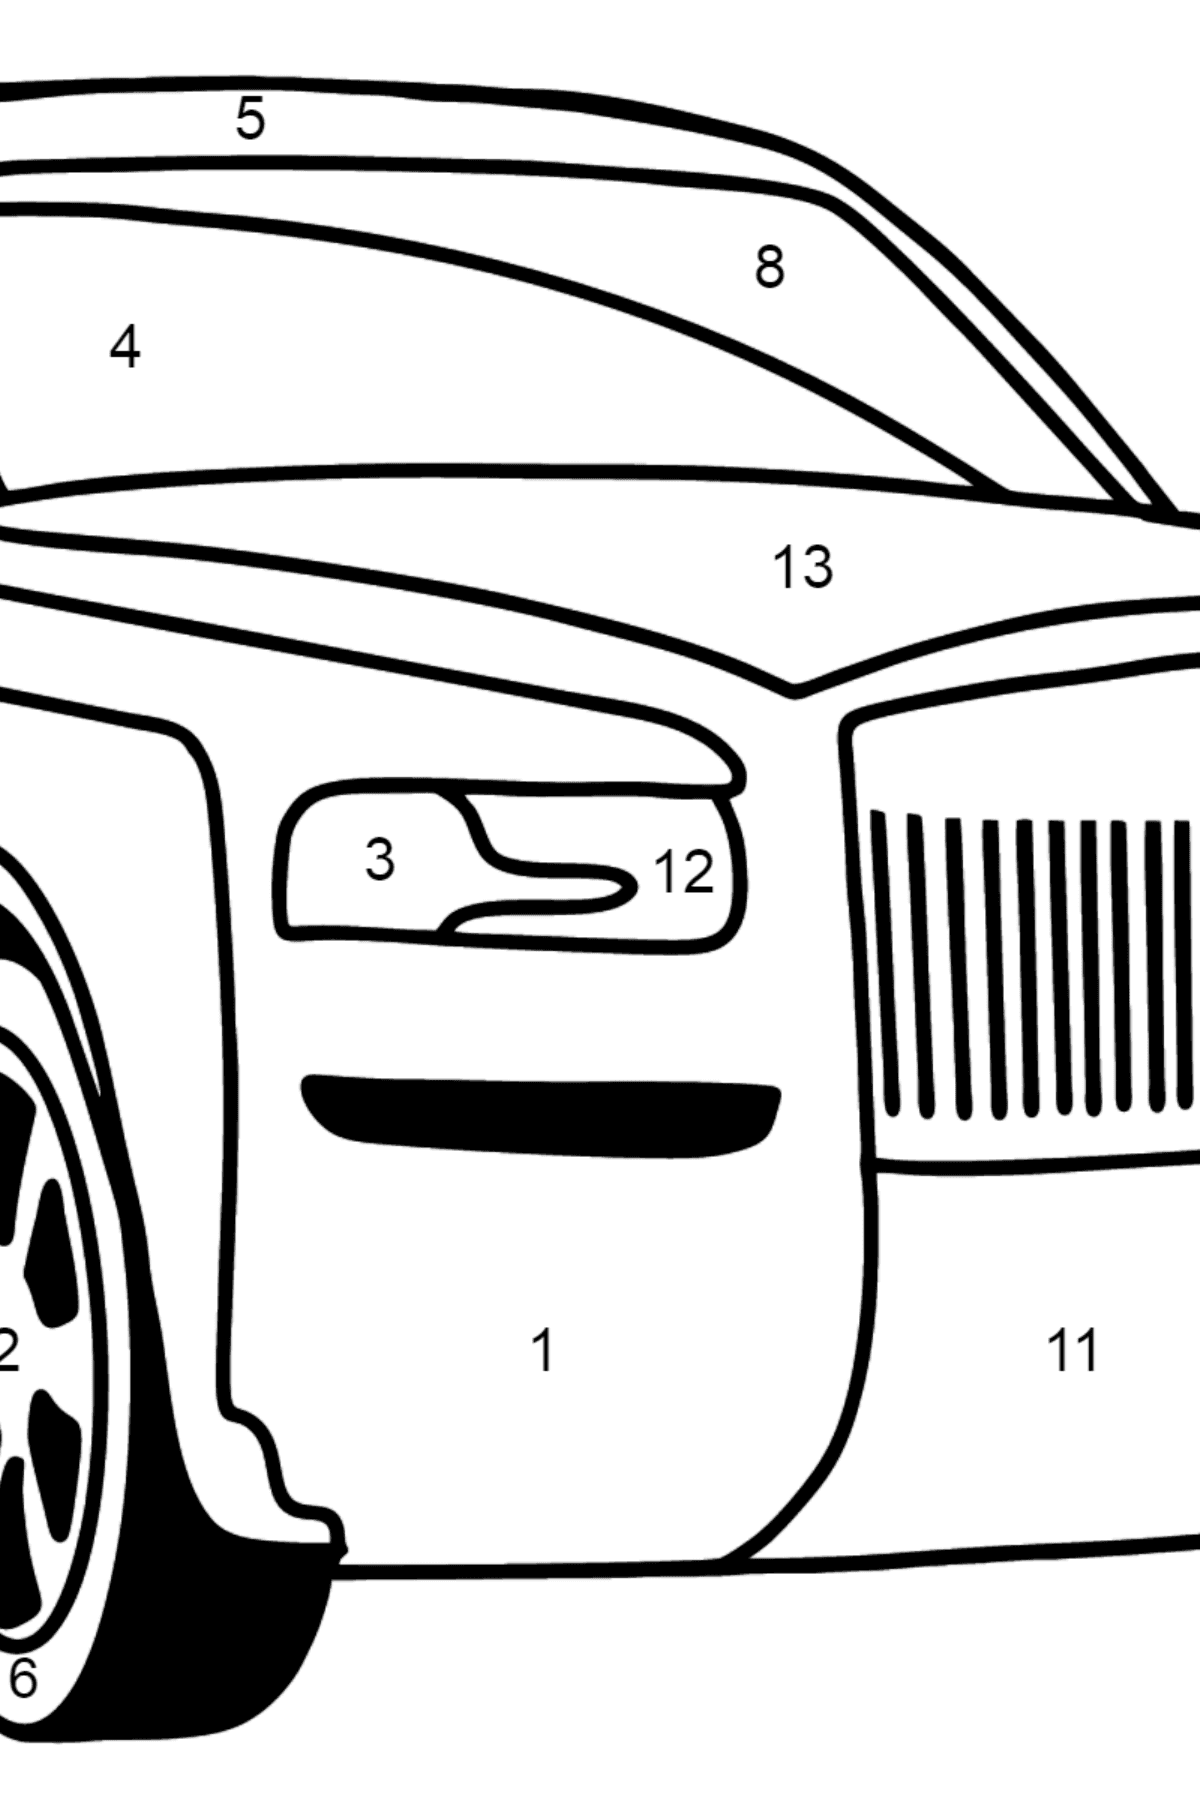 Rolls Royce Cullinan Car coloring page - Coloring by Numbers for Kids